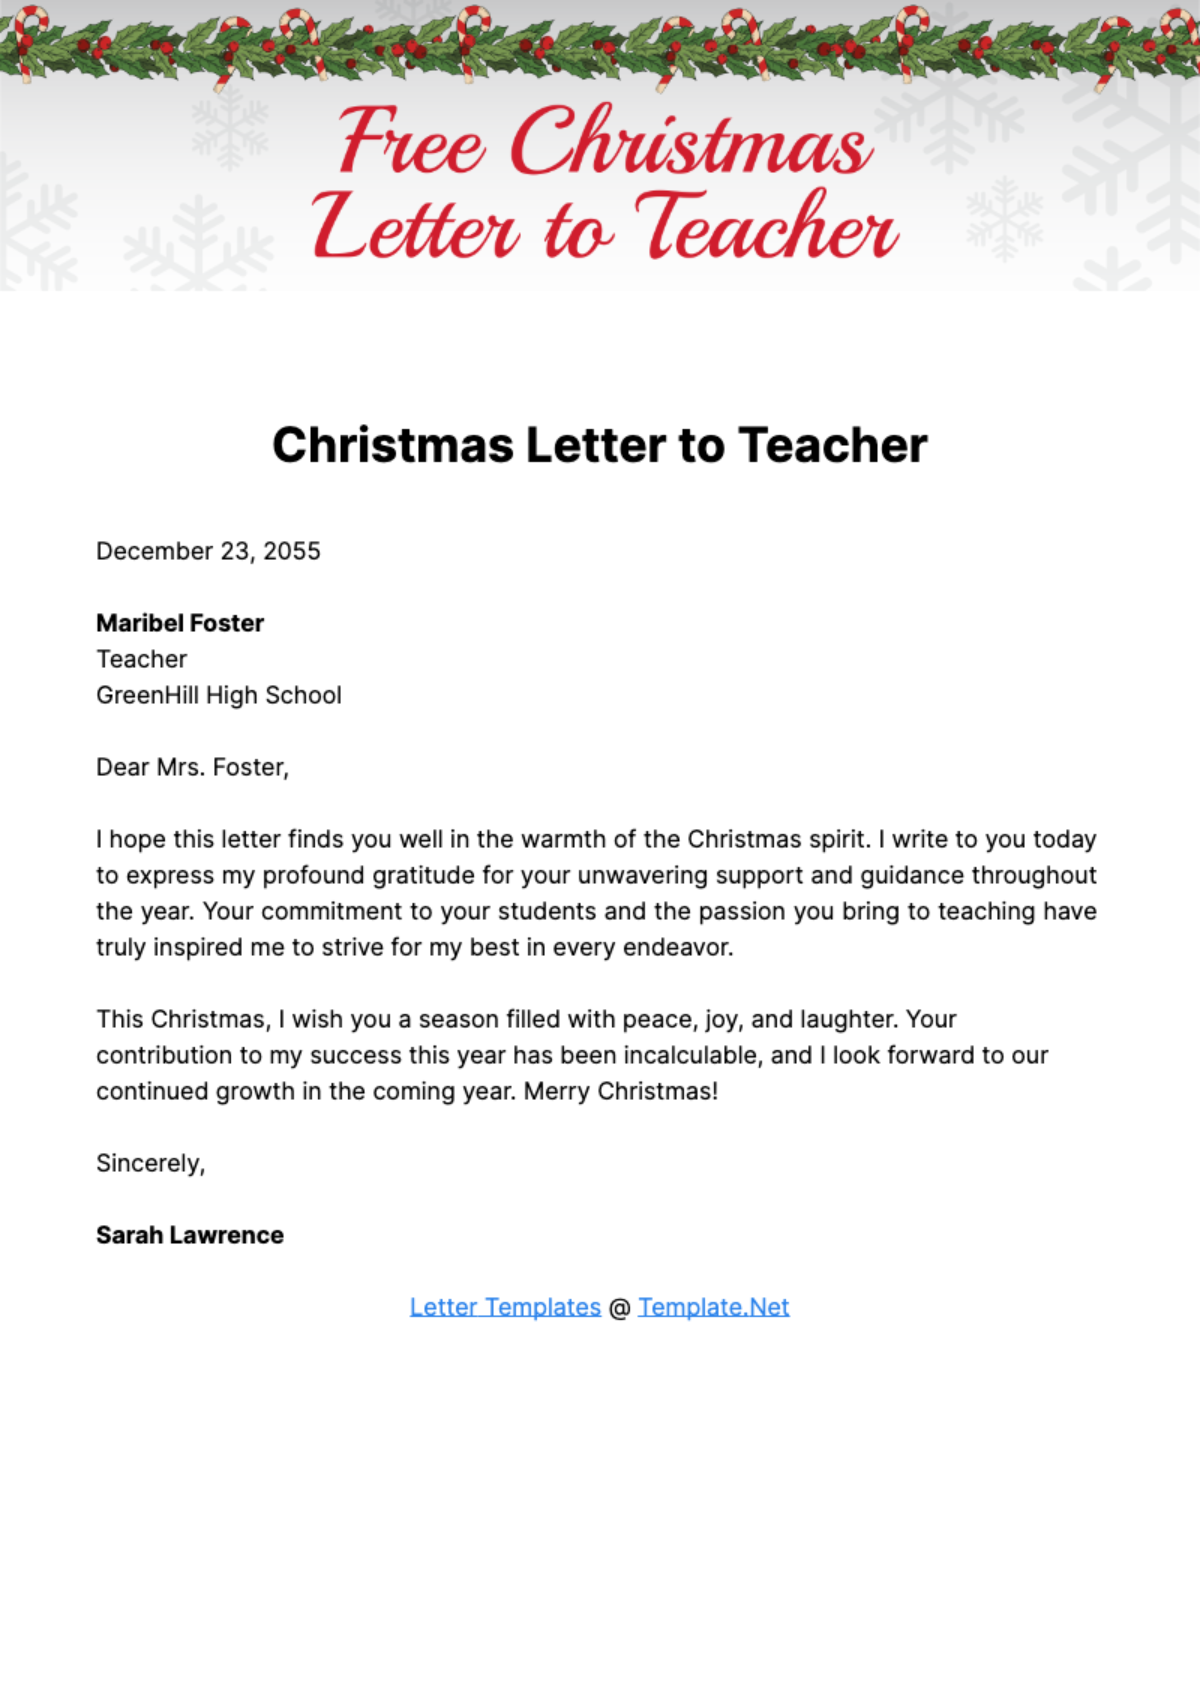 Free Christmas Letter to Teacher Template